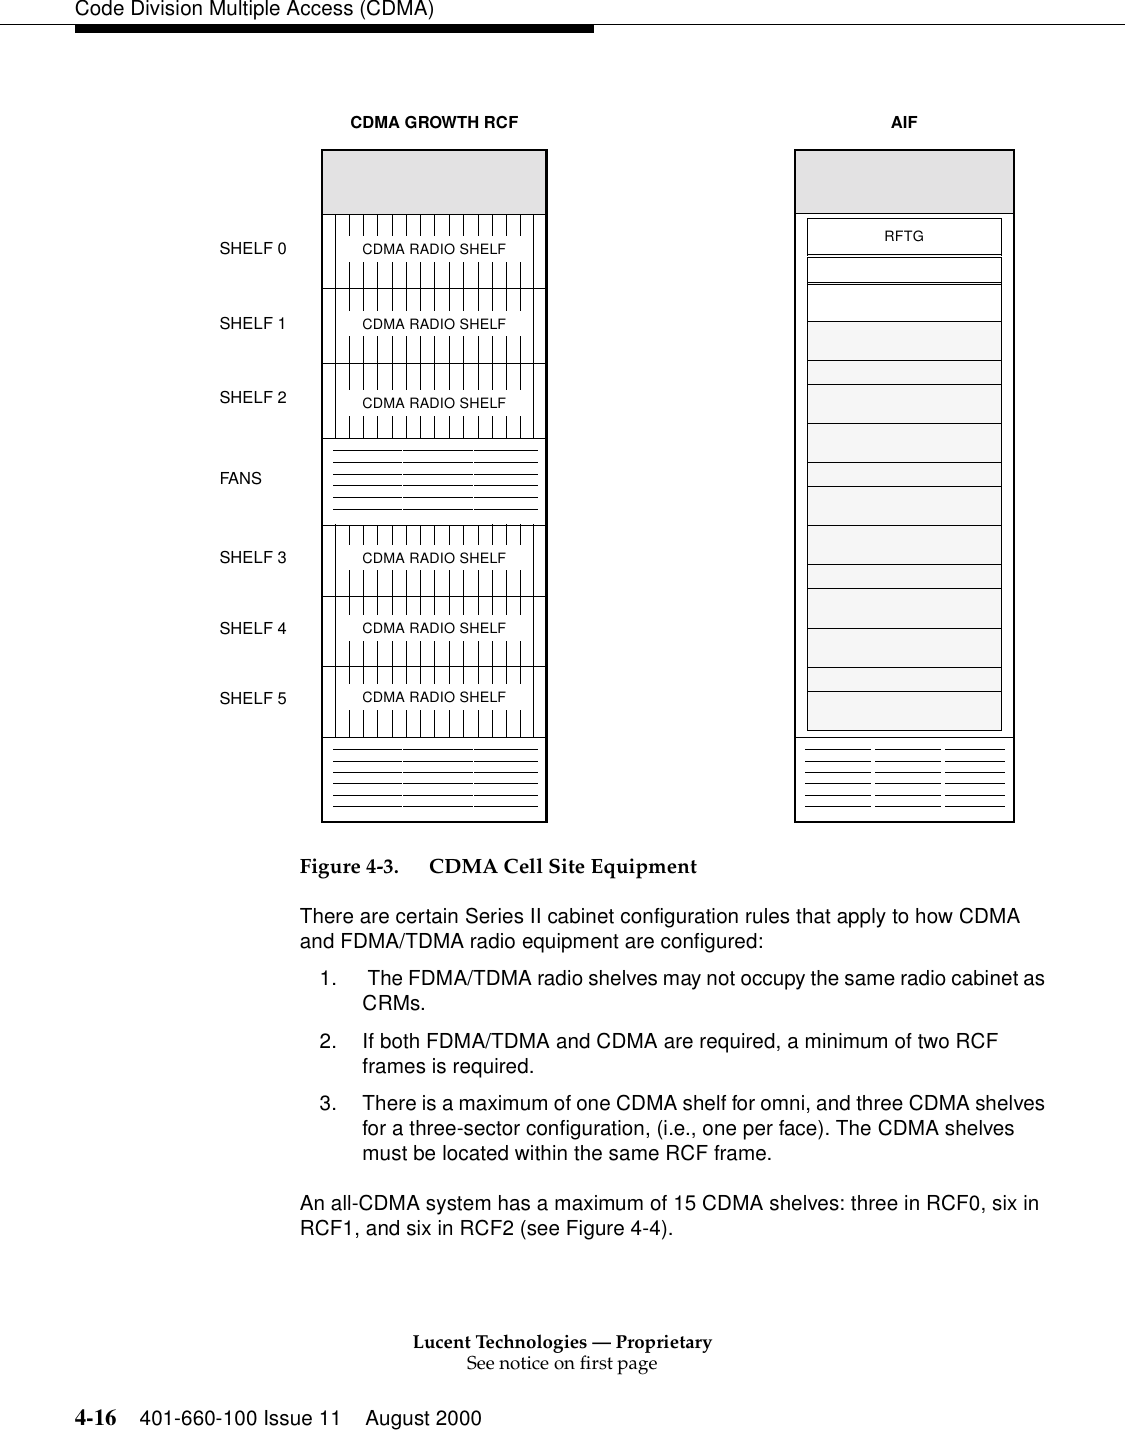 Lucent Technologies — ProprietarySee notice on first page4-16 401-660-100 Issue 11 August 2000Code Division Multiple Access (CDMA)Figure 4-3. CDMA Cell Site EquipmentThere are certain Series II cabinet configuration rules that apply to how CDMA and FDMA/TDMA radio equipment are configured:1.  The FDMA/TDMA radio shelves may not occupy the same radio cabinet as CRMs. 2. If both FDMA/TDMA and CDMA are required, a minimum of two RCF frames is required. 3. There is a maximum of one CDMA shelf for omni, and three CDMA shelves for a three-sector configuration, (i.e., one per face). The CDMA shelves must be located within the same RCF frame. An all-CDMA system has a maximum of 15 CDMA shelves: three in RCF0, six in RCF1, and six in RCF2 (see Figure 4-4). RFTGAIFCDMA GROWTH RCFCDMA RADIO SHELFCDMA RADIO SHELFCDMA RADIO SHELFCDMA RADIO SHELFCDMA RADIO SHELFCDMA RADIO SHELFSHELF 0SHELF 1FANSSHELF 3SHELF 4SHELF 5SHELF 2